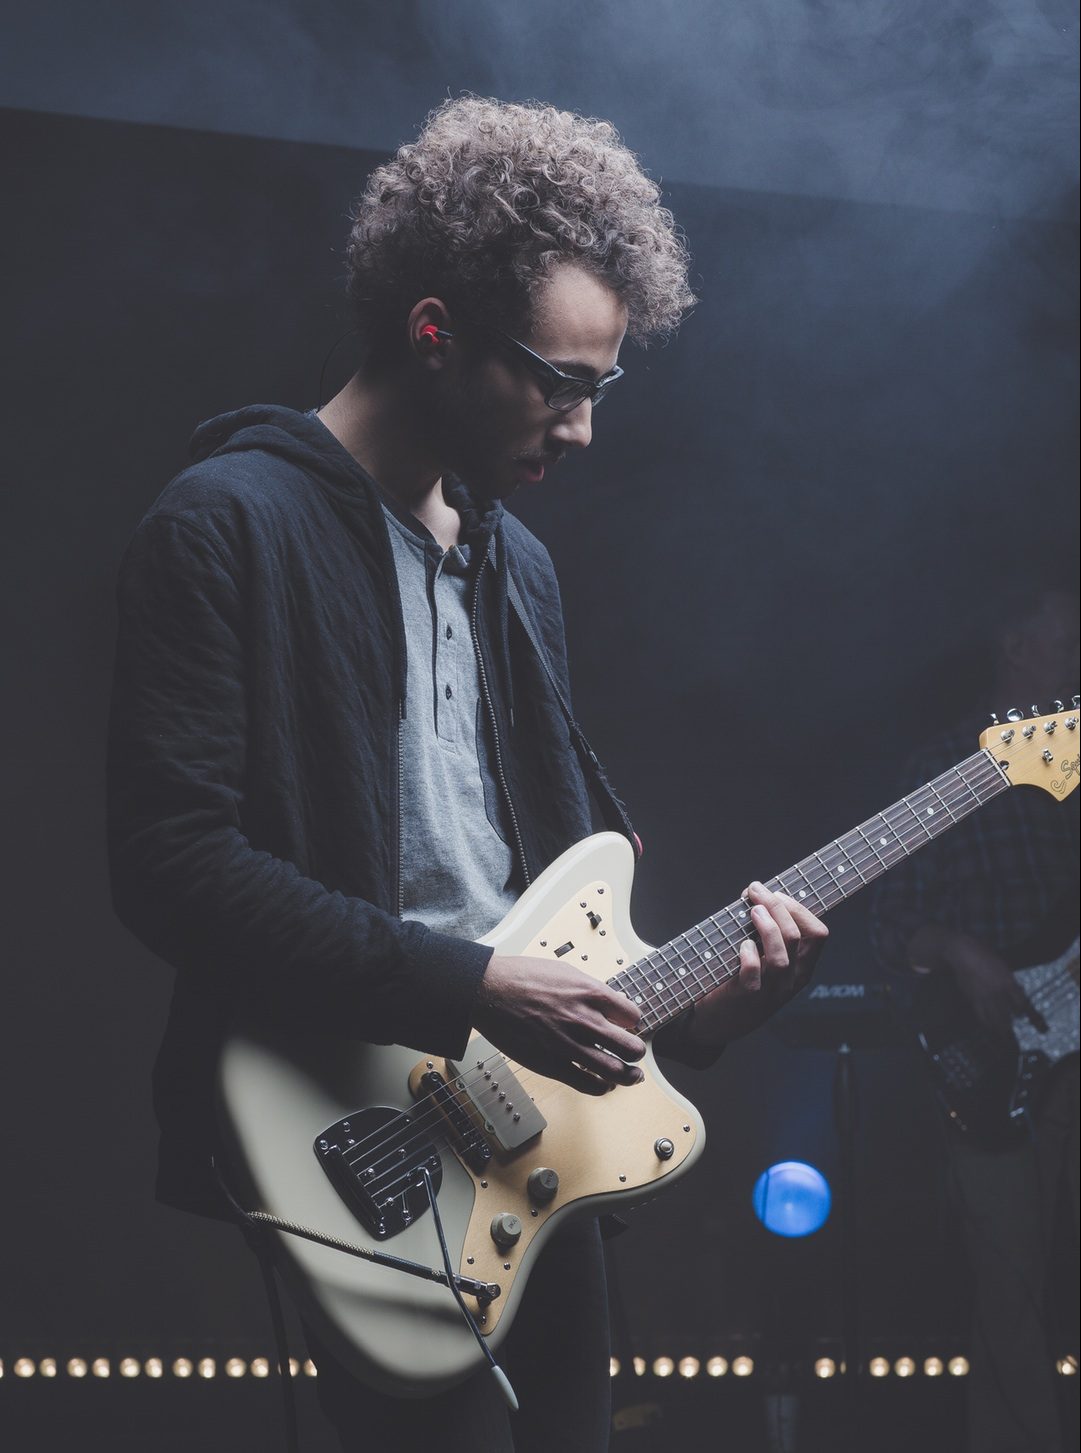 Man playing a guitar on stage